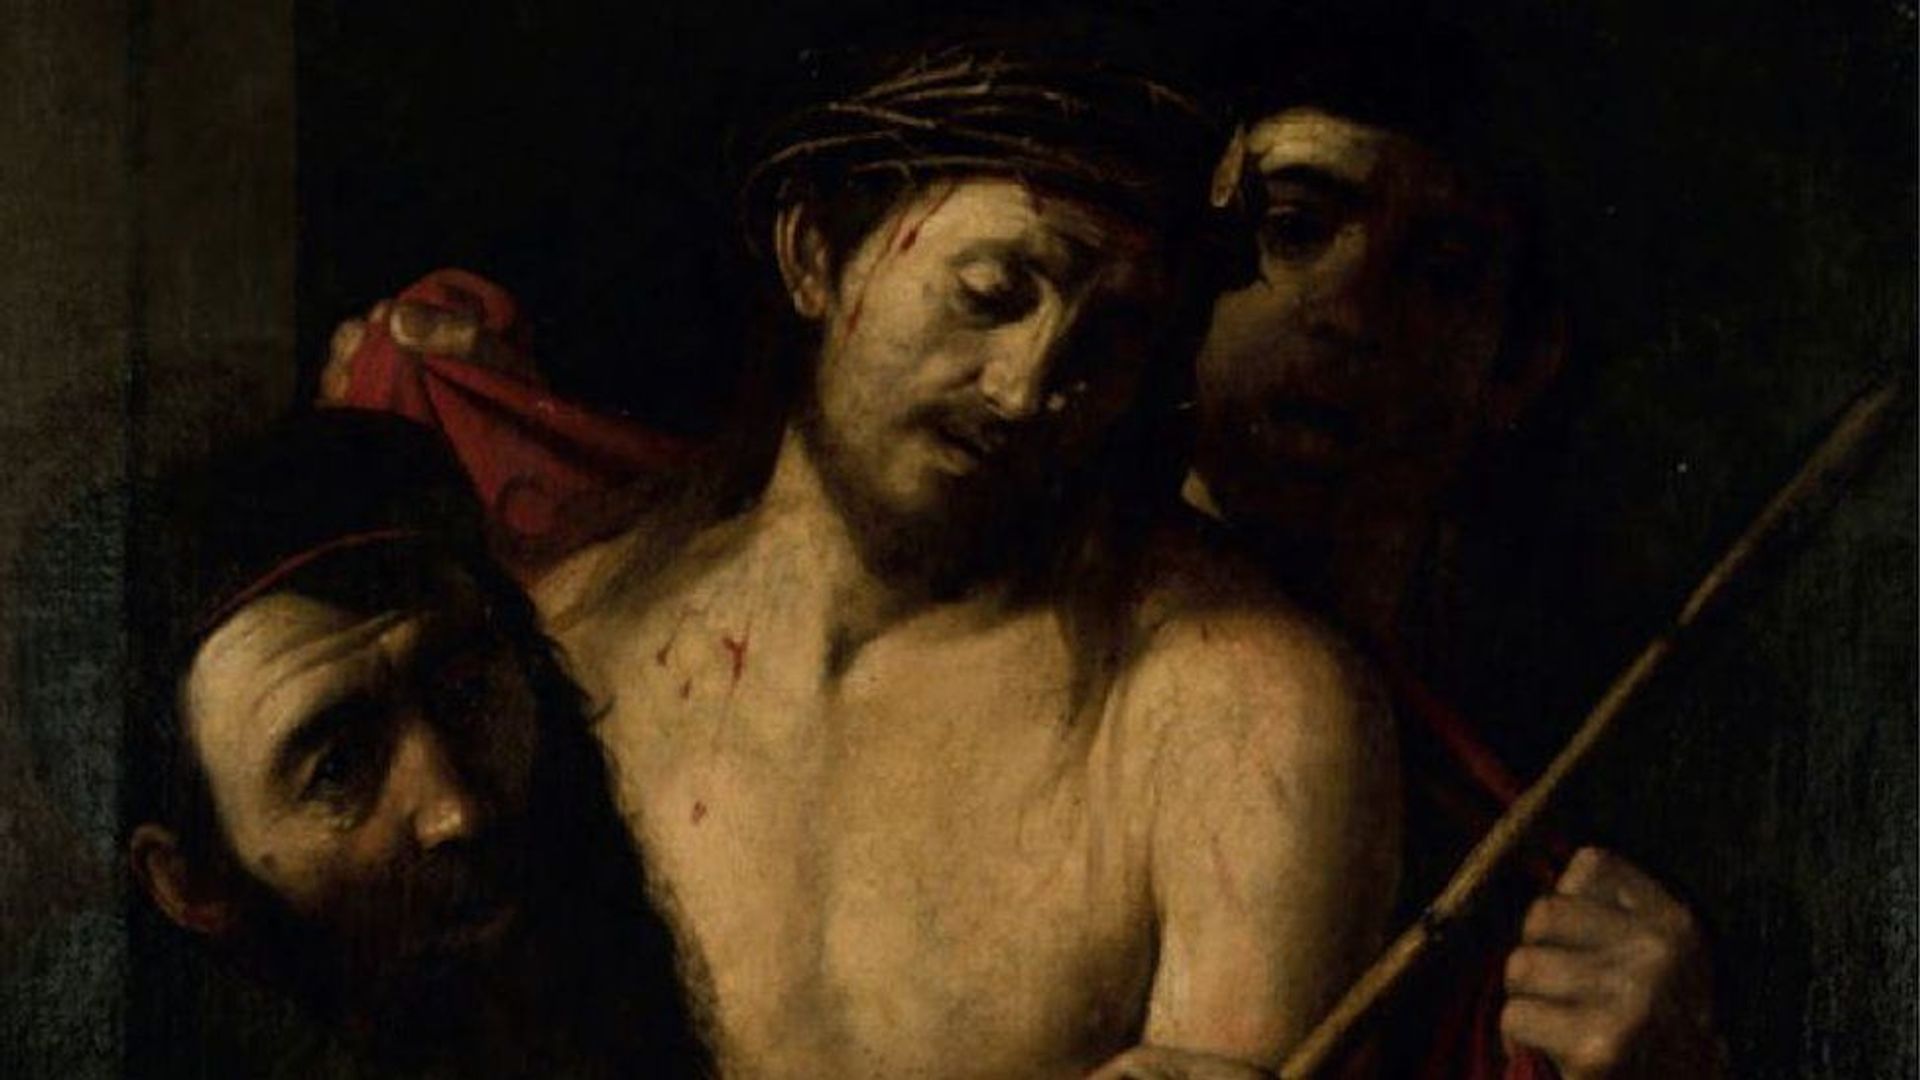 Colnaghi will take on the further research of this painting, believed by some to be by Caravaggio Courtesy of Ansorena